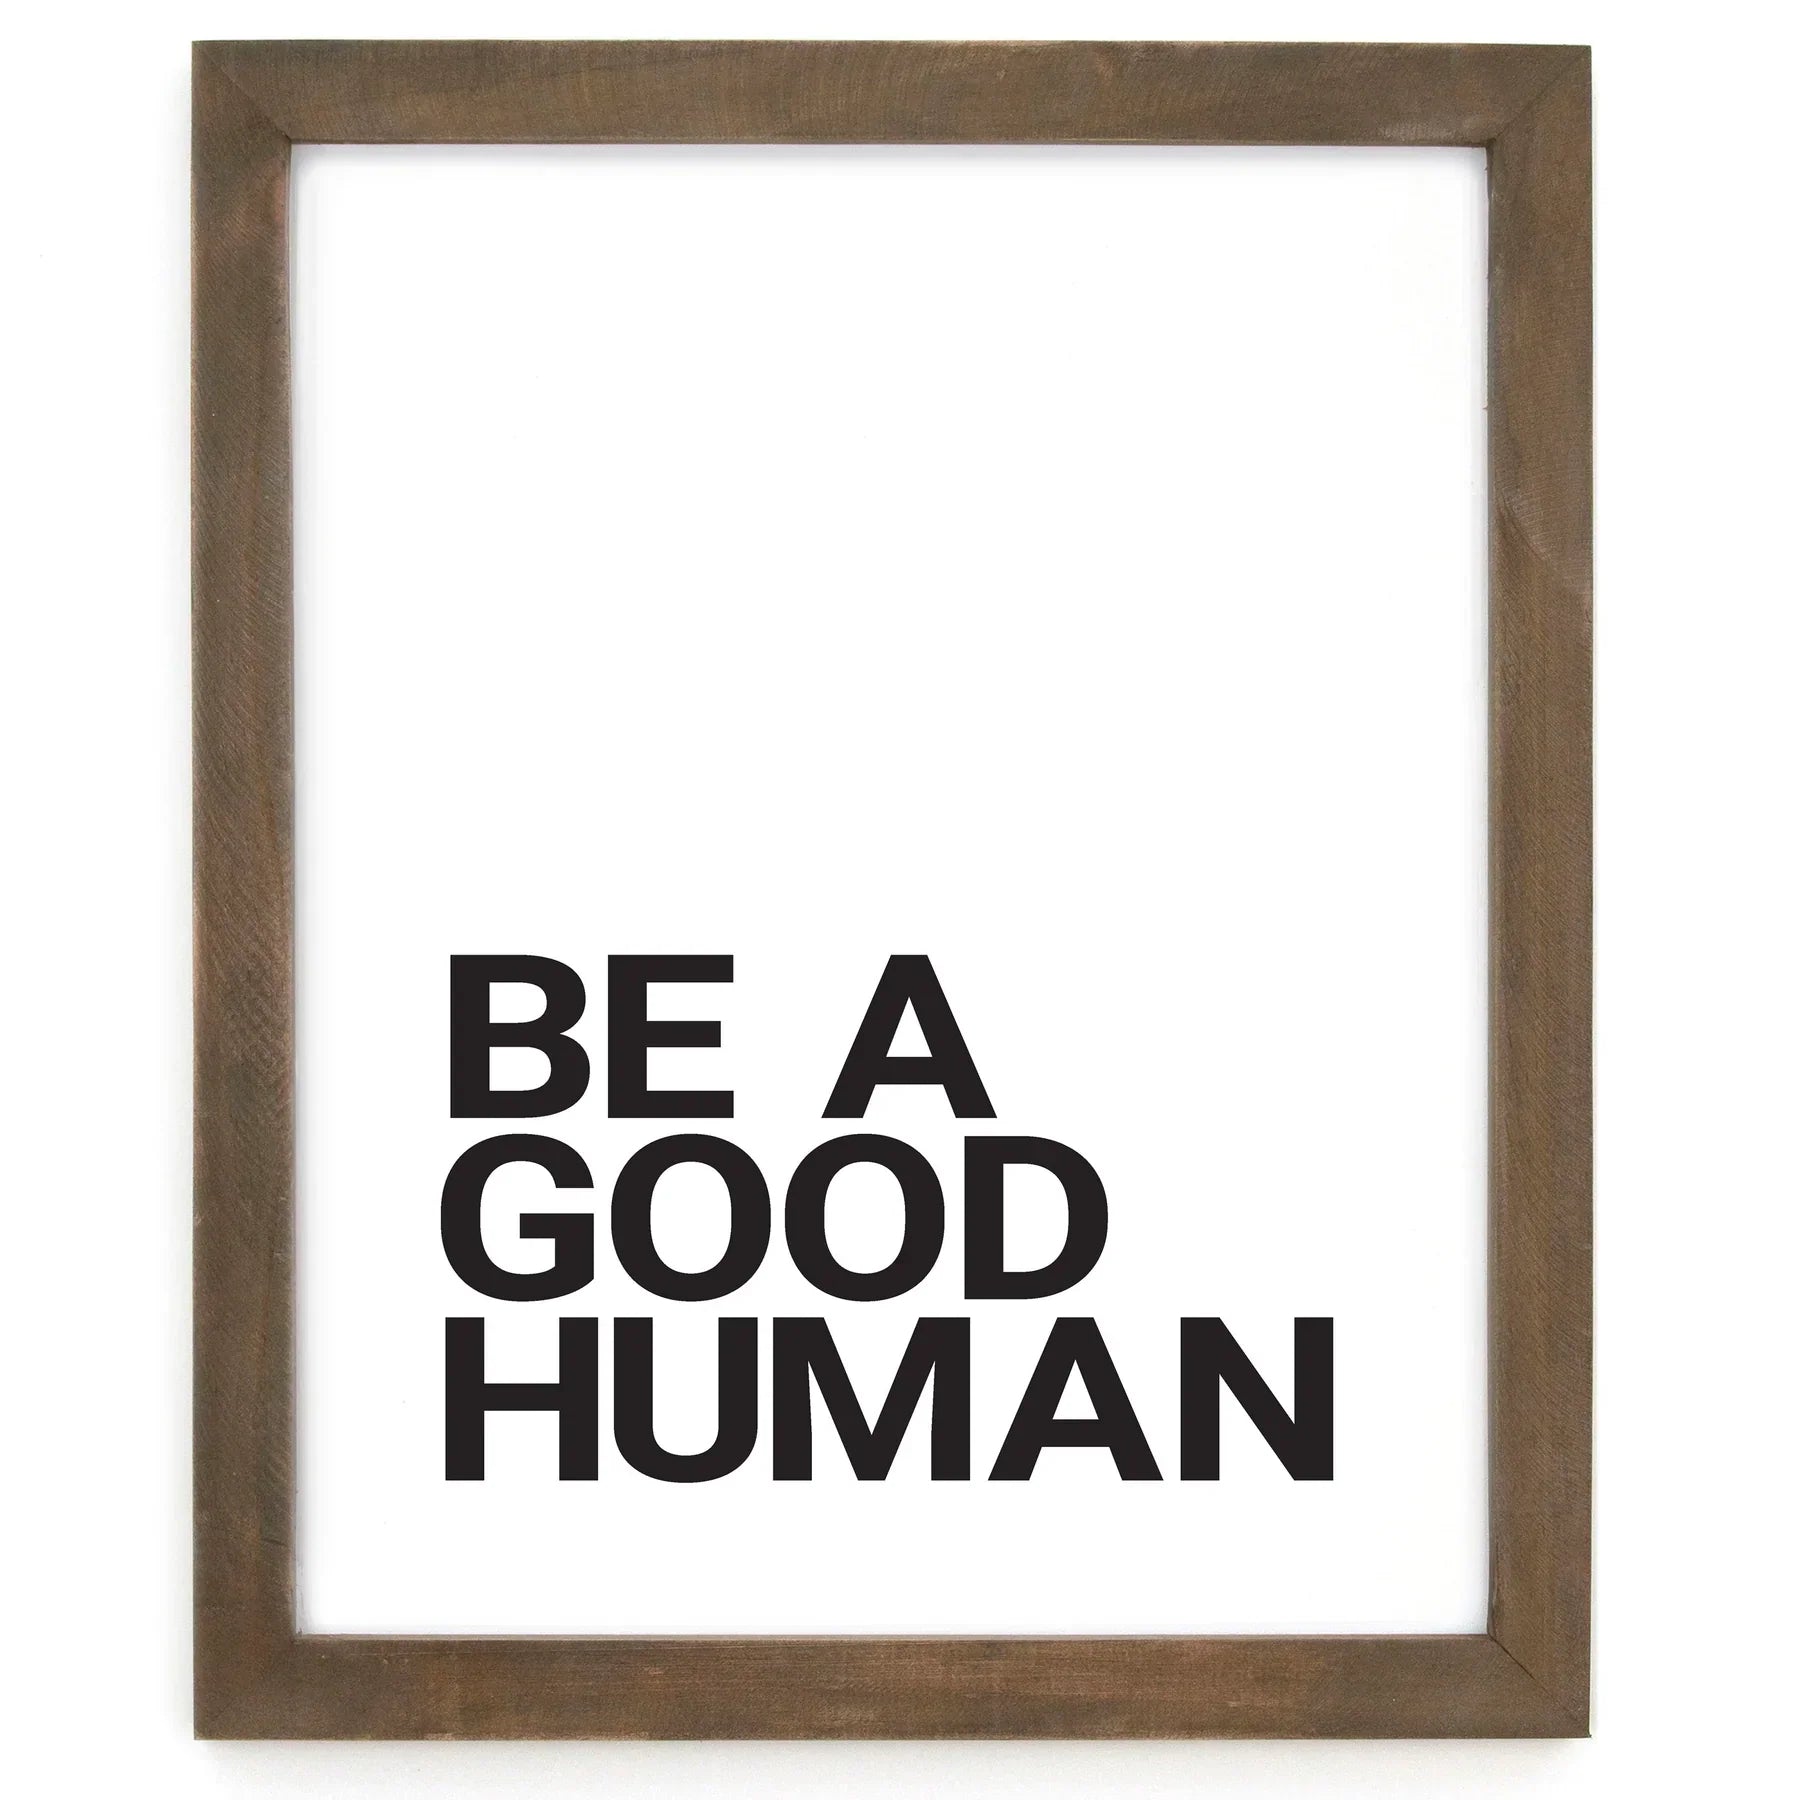 "Be a Good Human" Framed Words